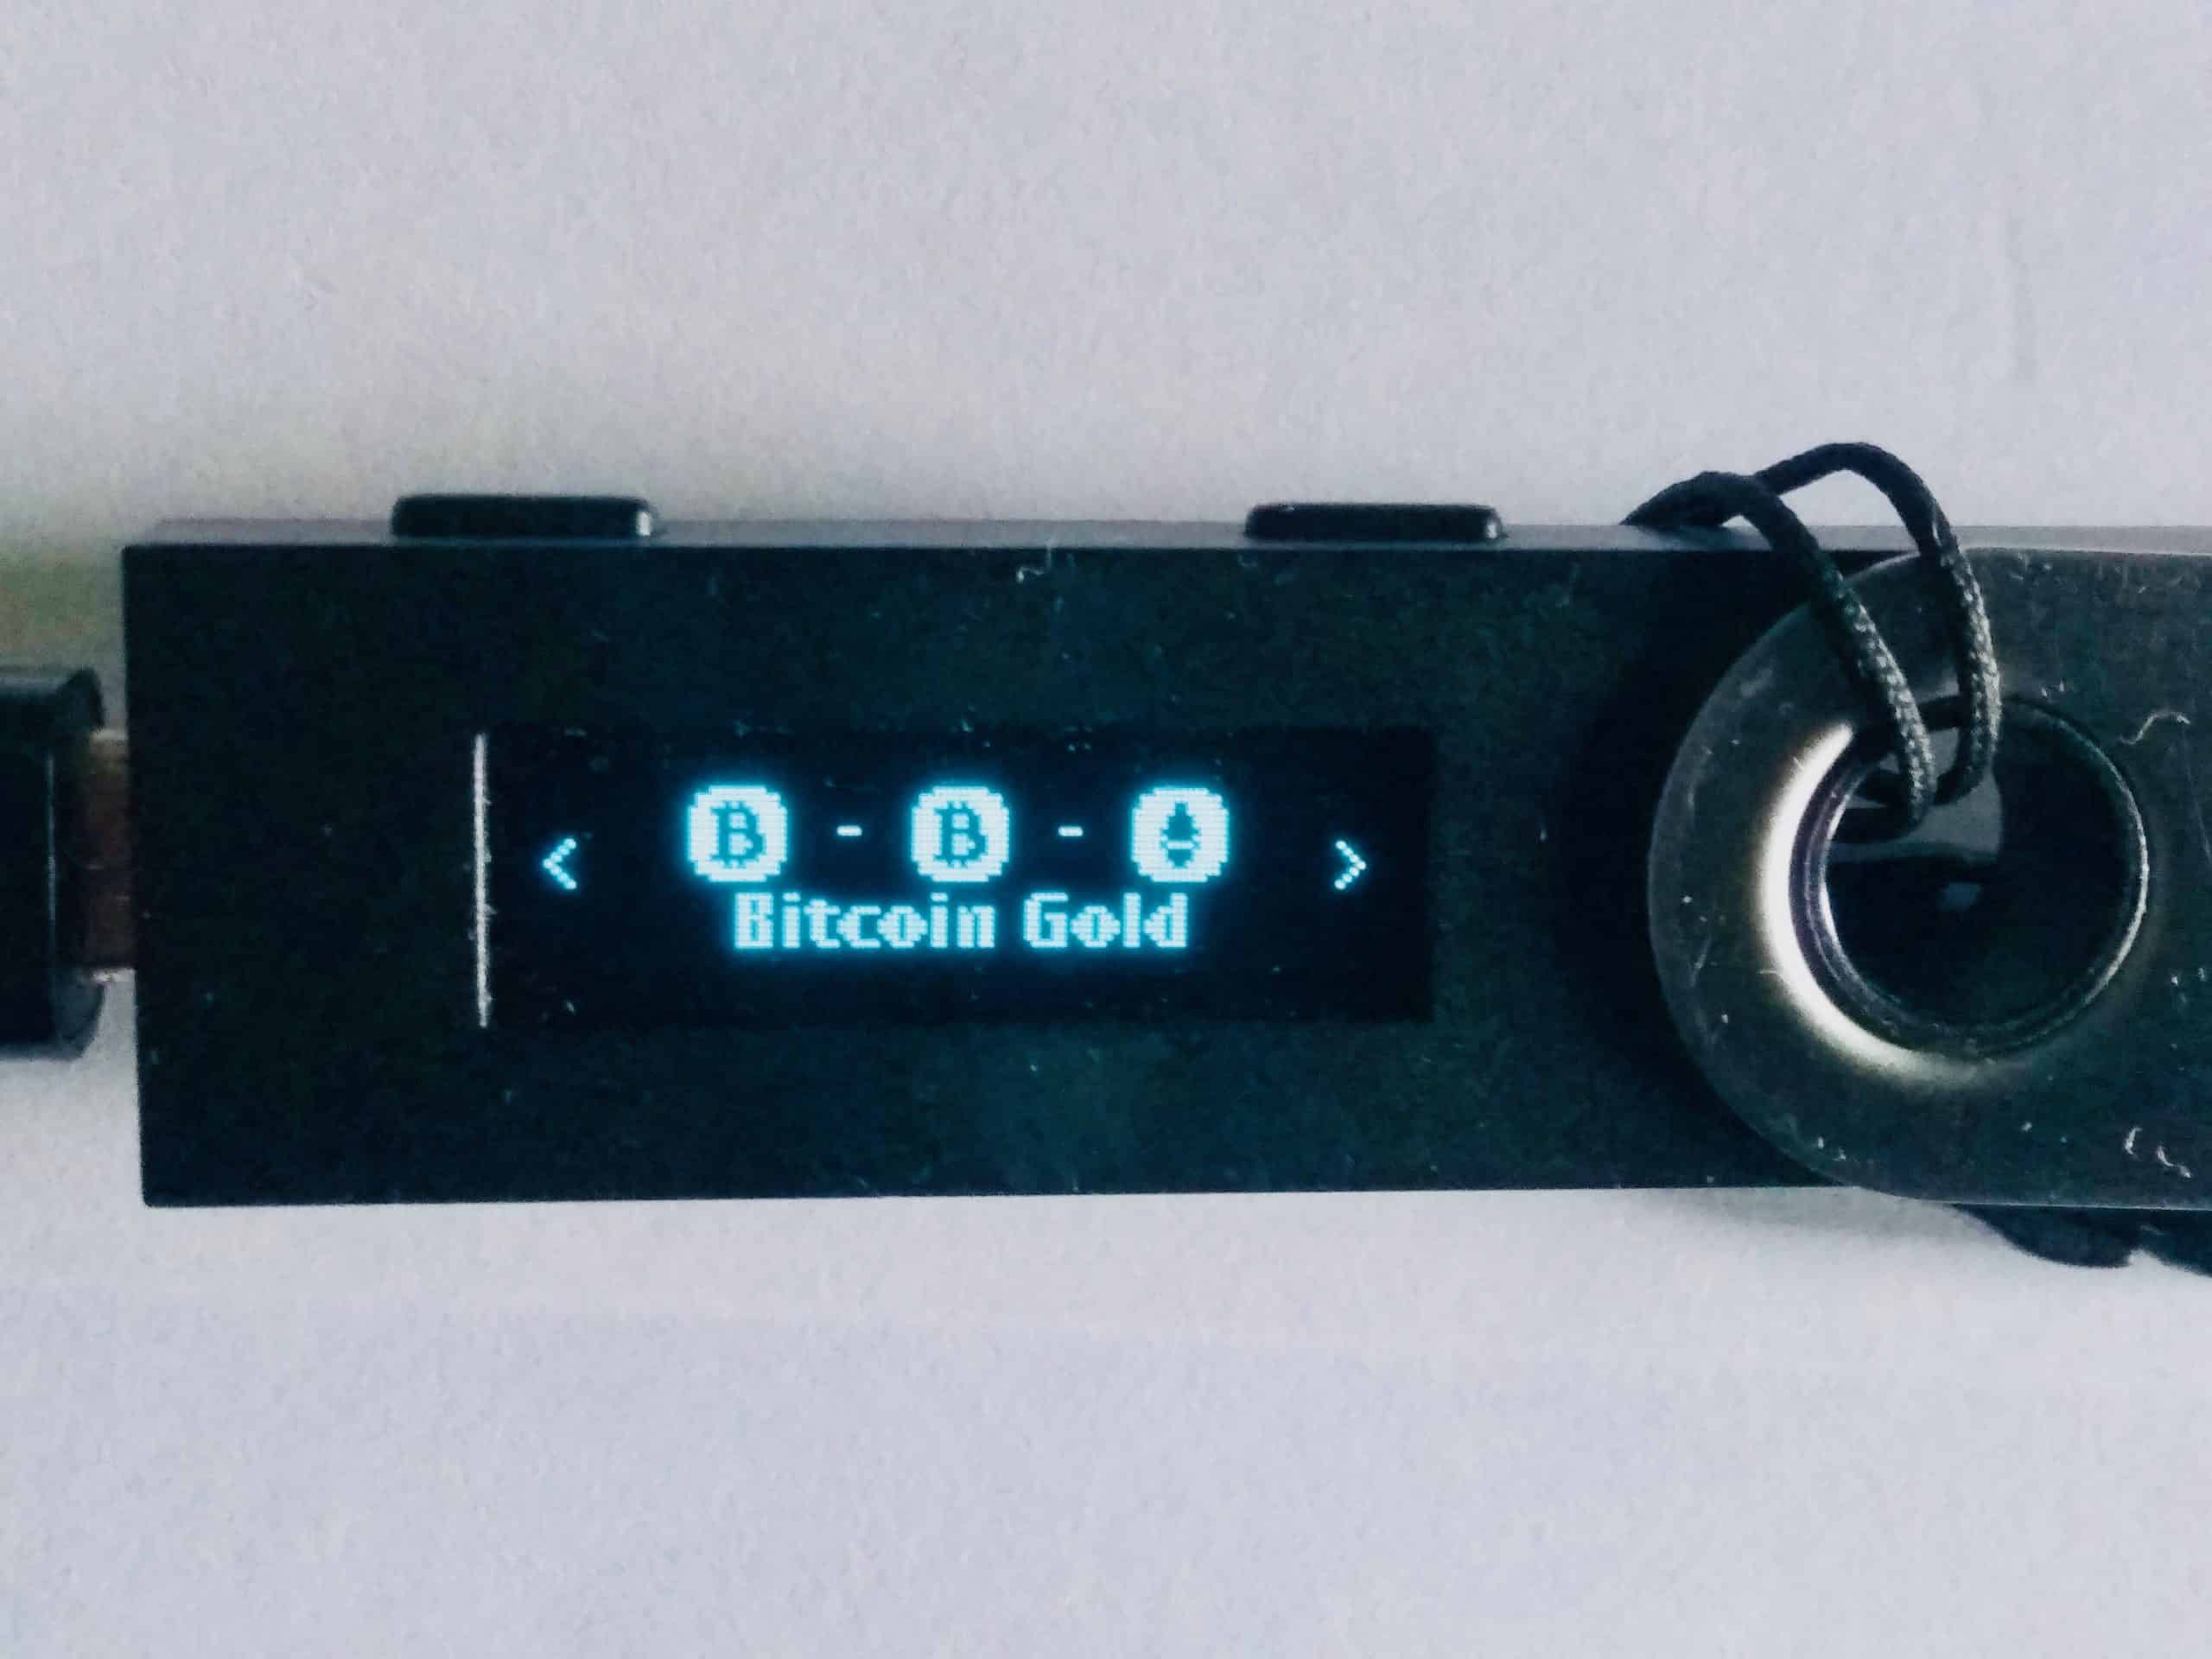 How to Claim Bitcoin Gold on Ledger Nano S - A Step by Step Guide